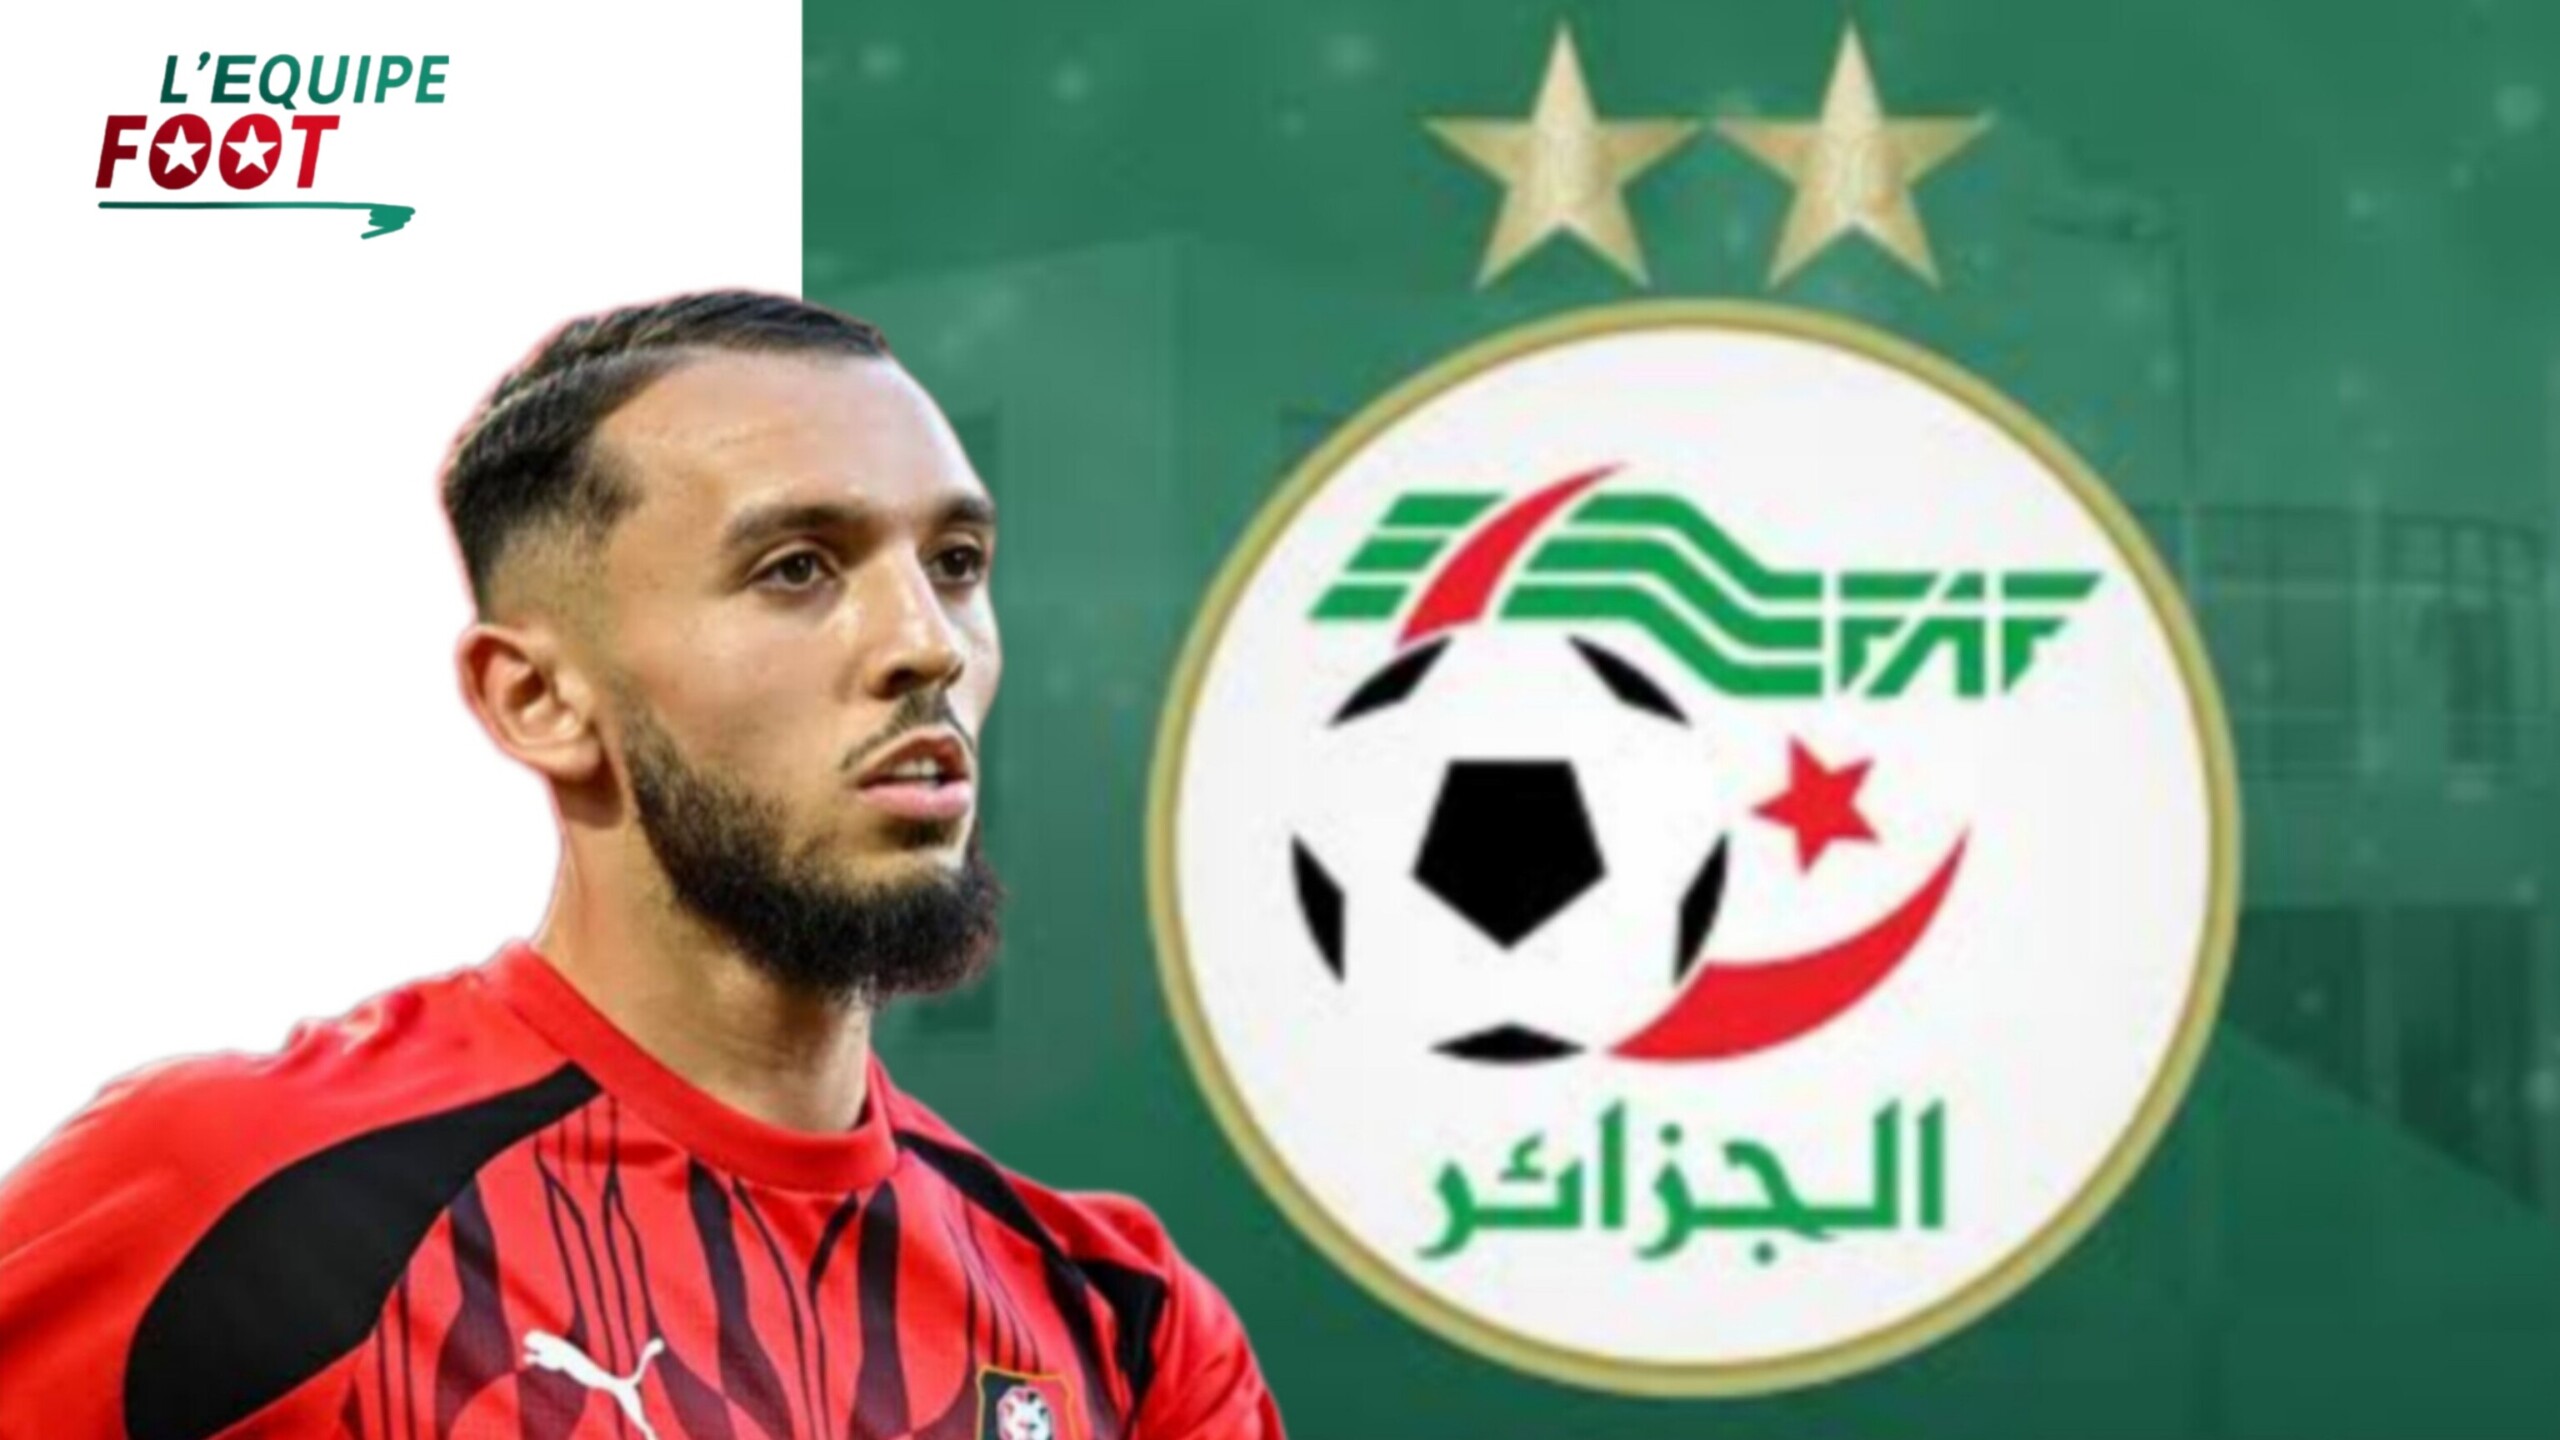 Amine Gouiri chooses to play for Algeria and will be a valuable piece in coach Belmadi’s squad in the upcoming matches